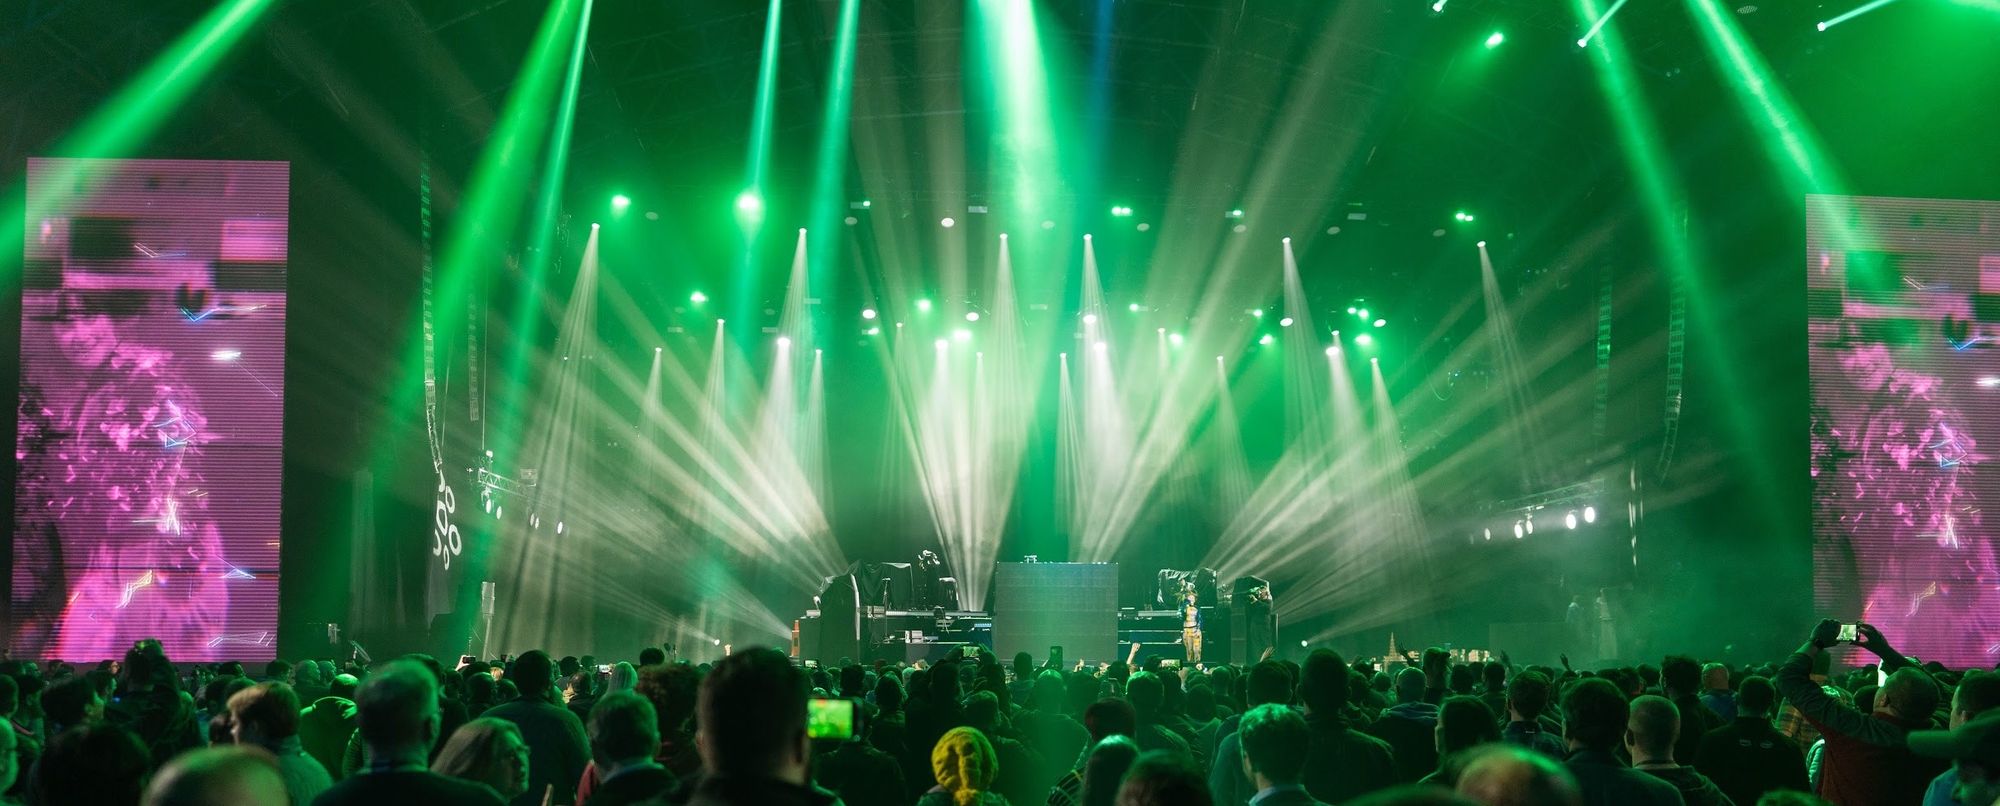 AWS reInvent Party Like a Pro How to get ready for one of the